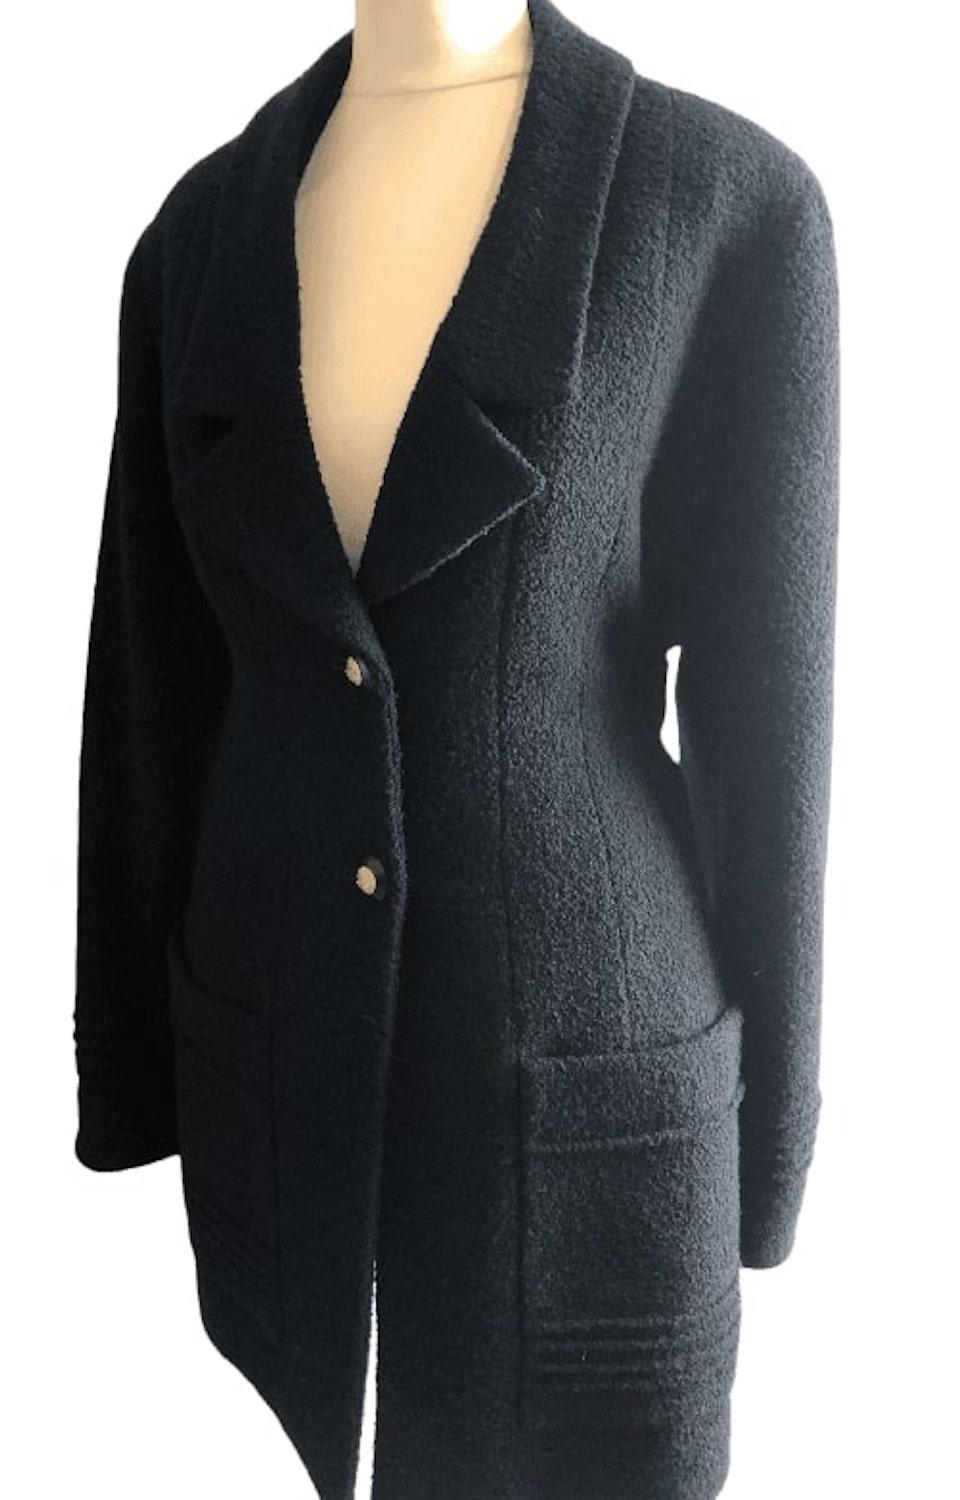 CHANEL Vintage Black Bouclé Wool CC Logo Buttons Jacket Suit 1993 In Good Condition For Sale In London, GB